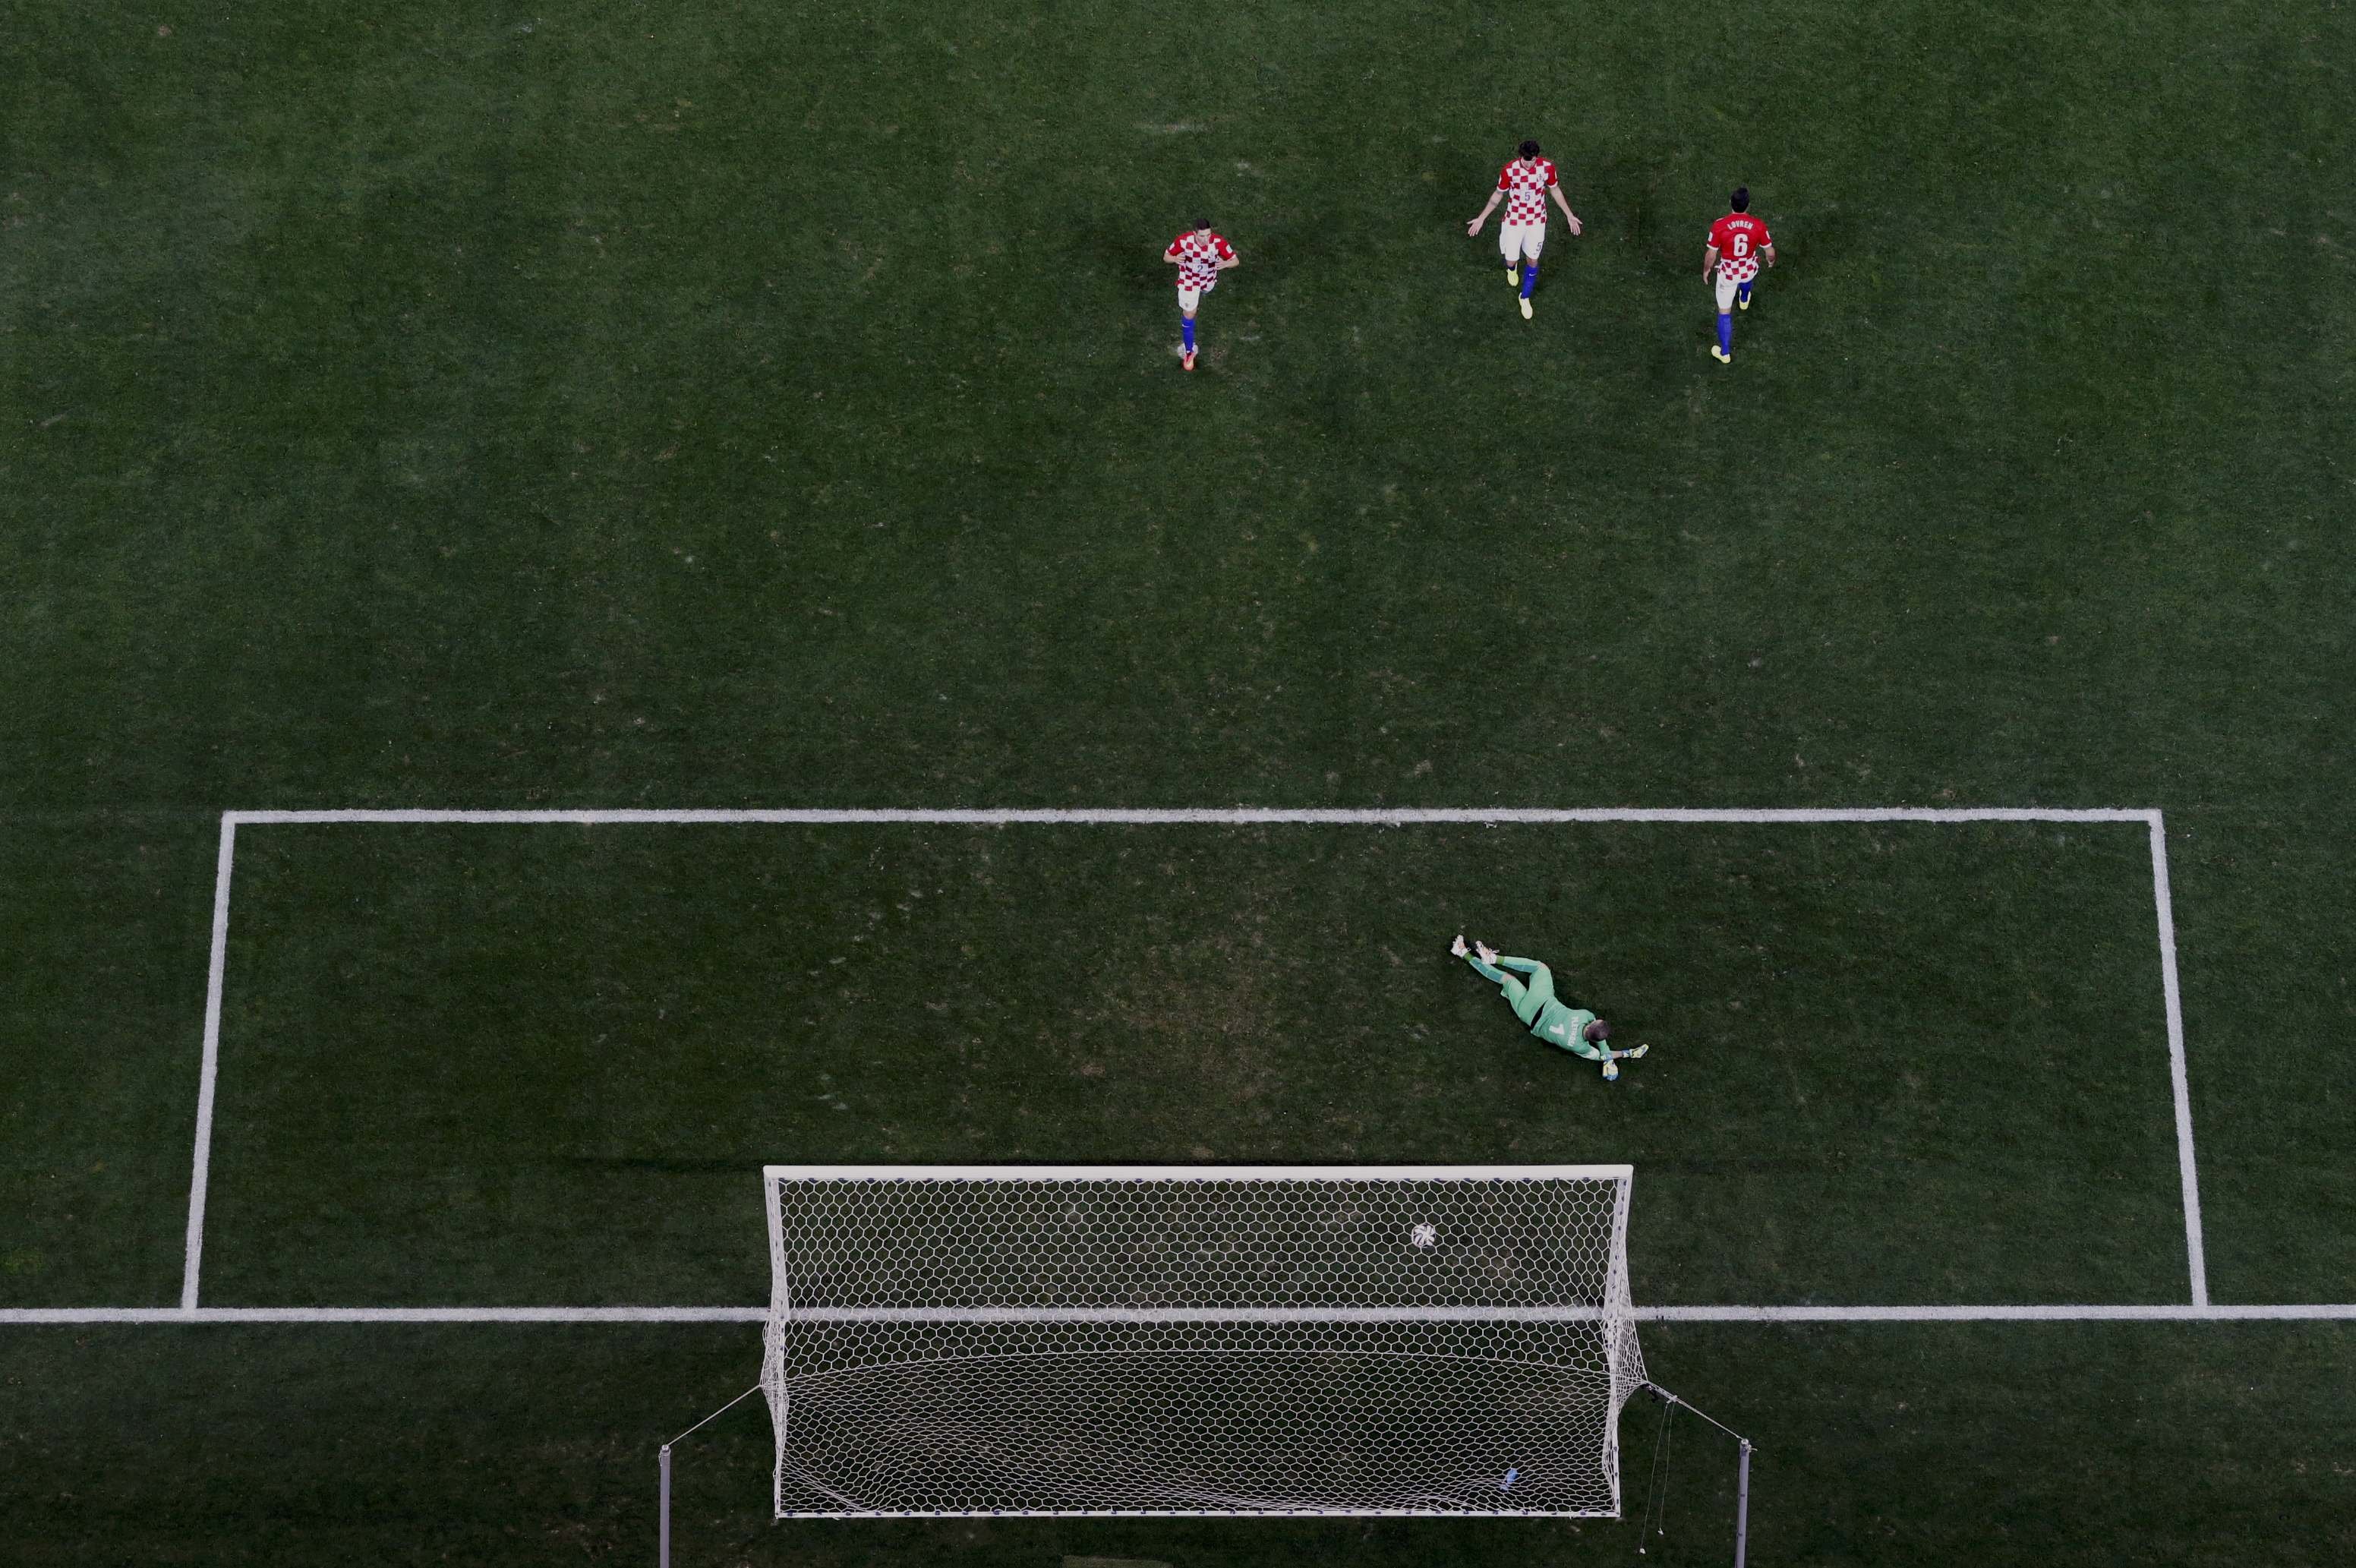 Croatia's players react after conceding a goal to Brazil's Oscar (unseen) during their 2014 World Cup opening match at the Corinthians arena in Sao Paulo on June 12, 2014.